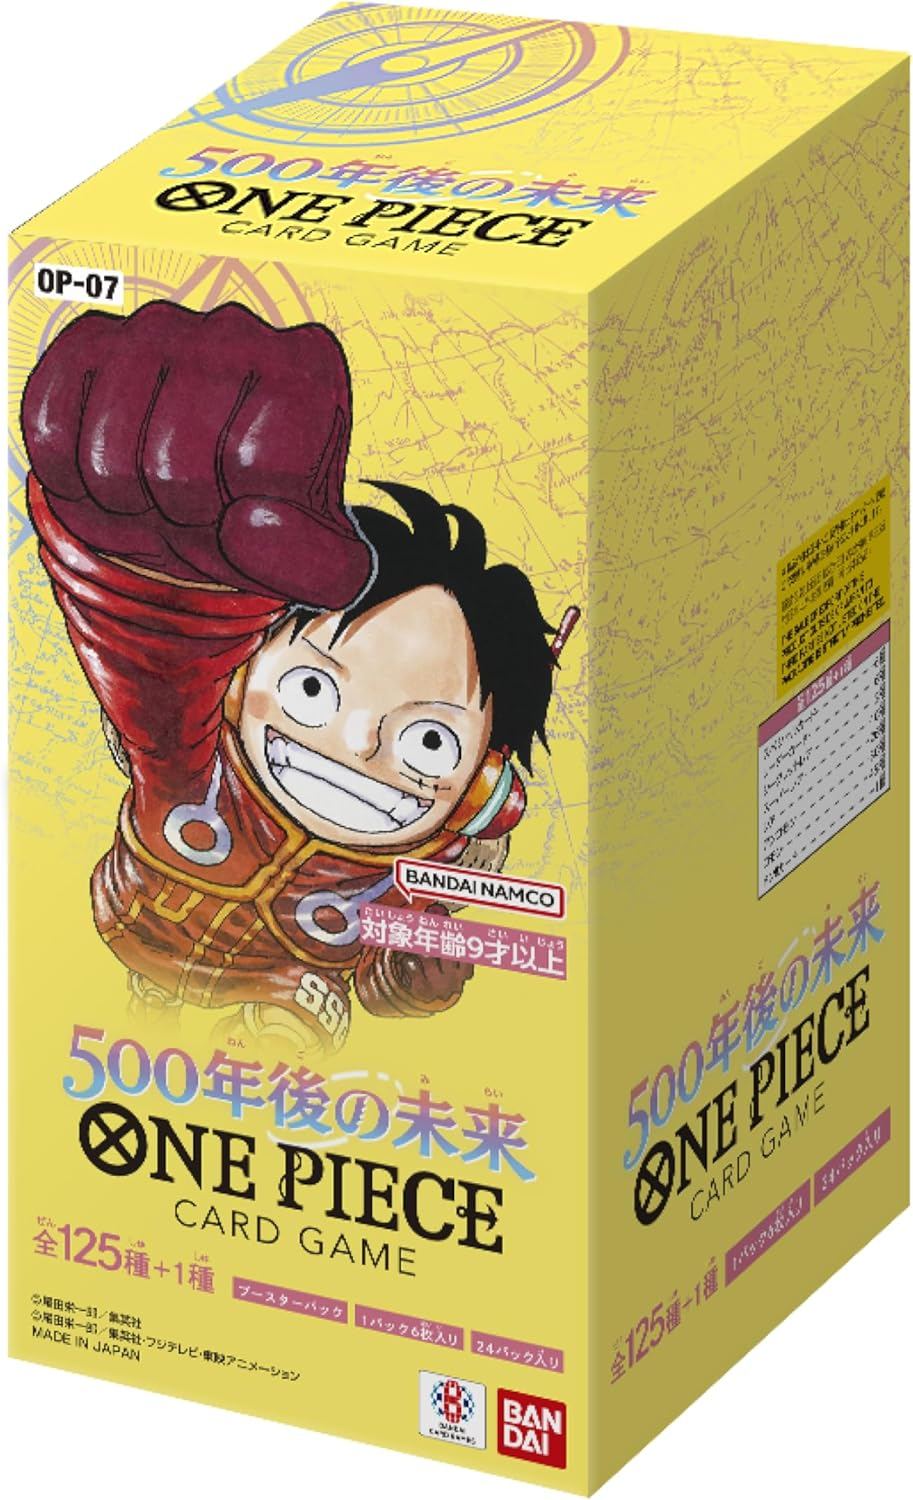 One Piece Card Game 500 Years From Now OP-07 (Set of 24 Packs) (Re-run) Bandai